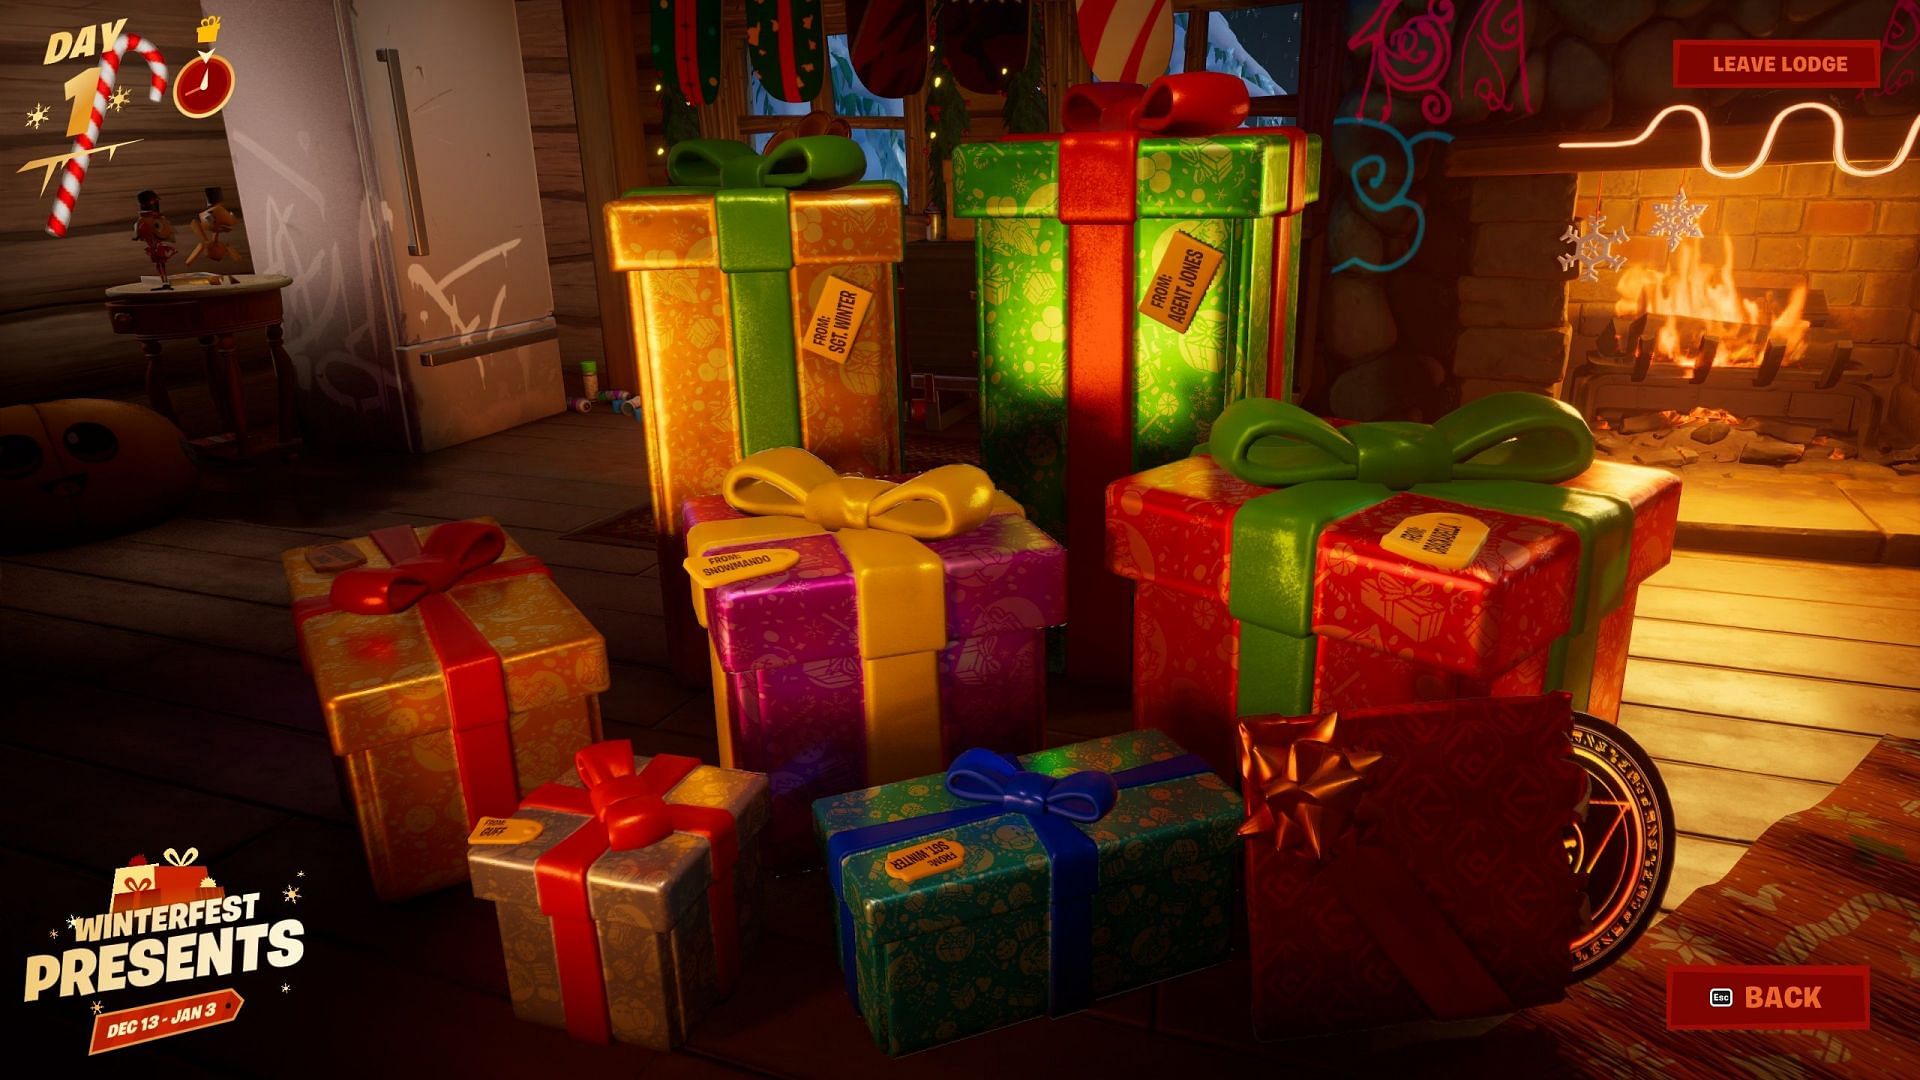 Many rewards are waiting for you in the Winterfest Lodge (Image via Epic Games)